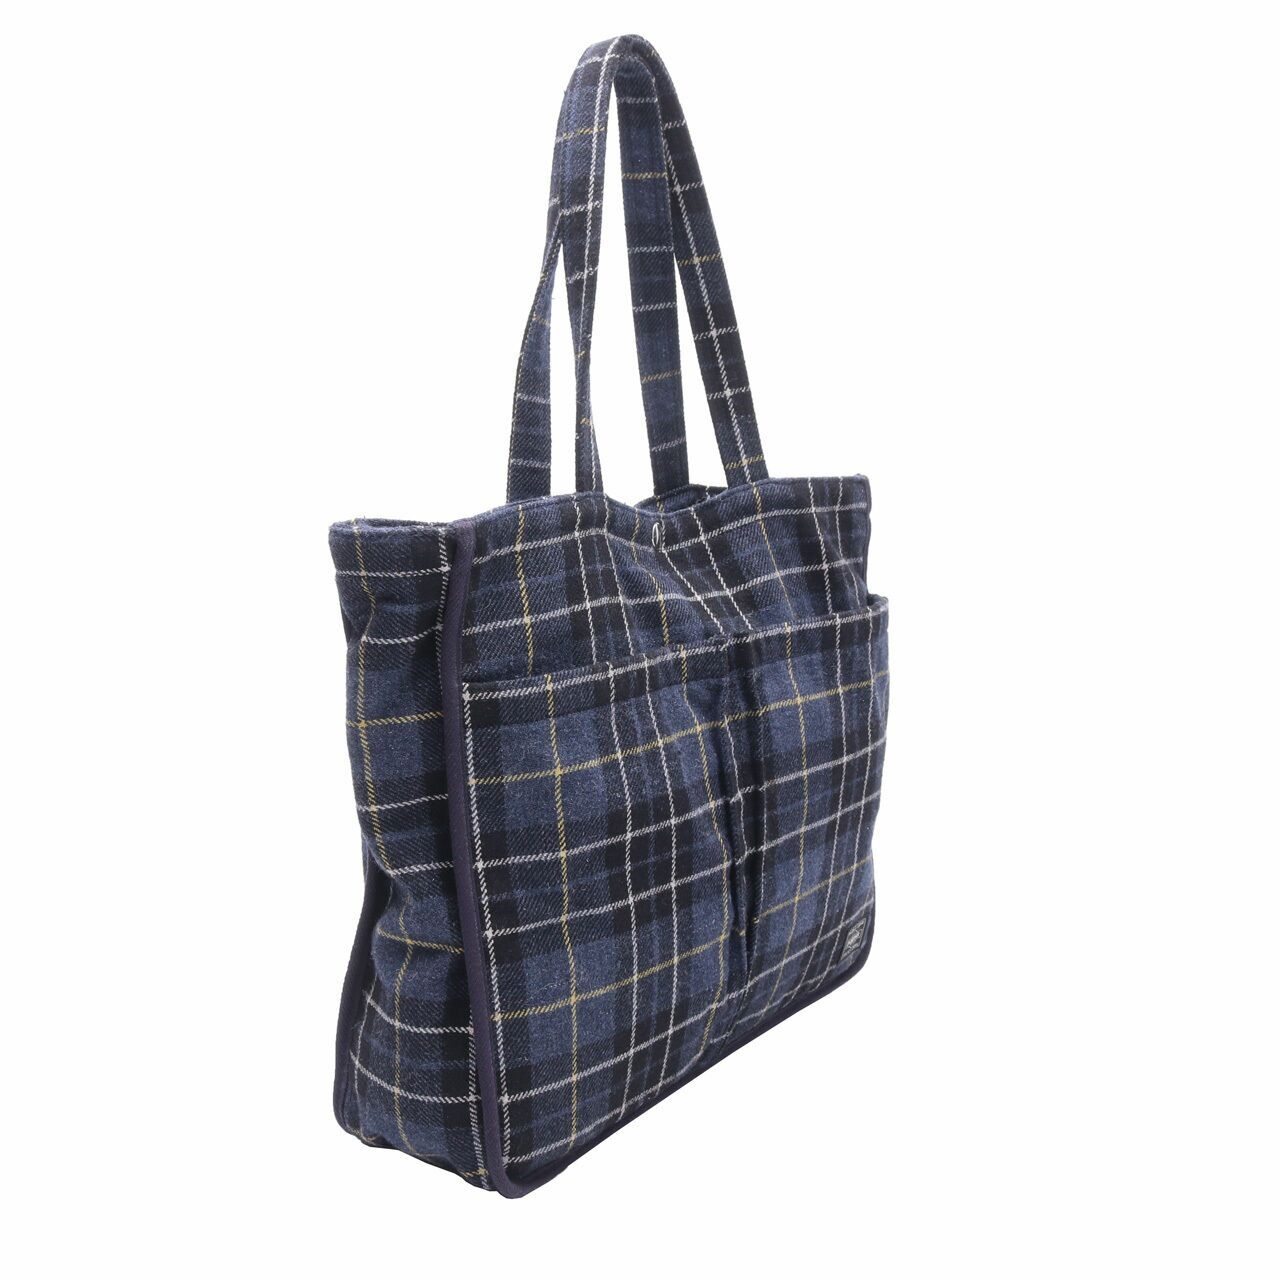 Private Collection Navy Tote Bag